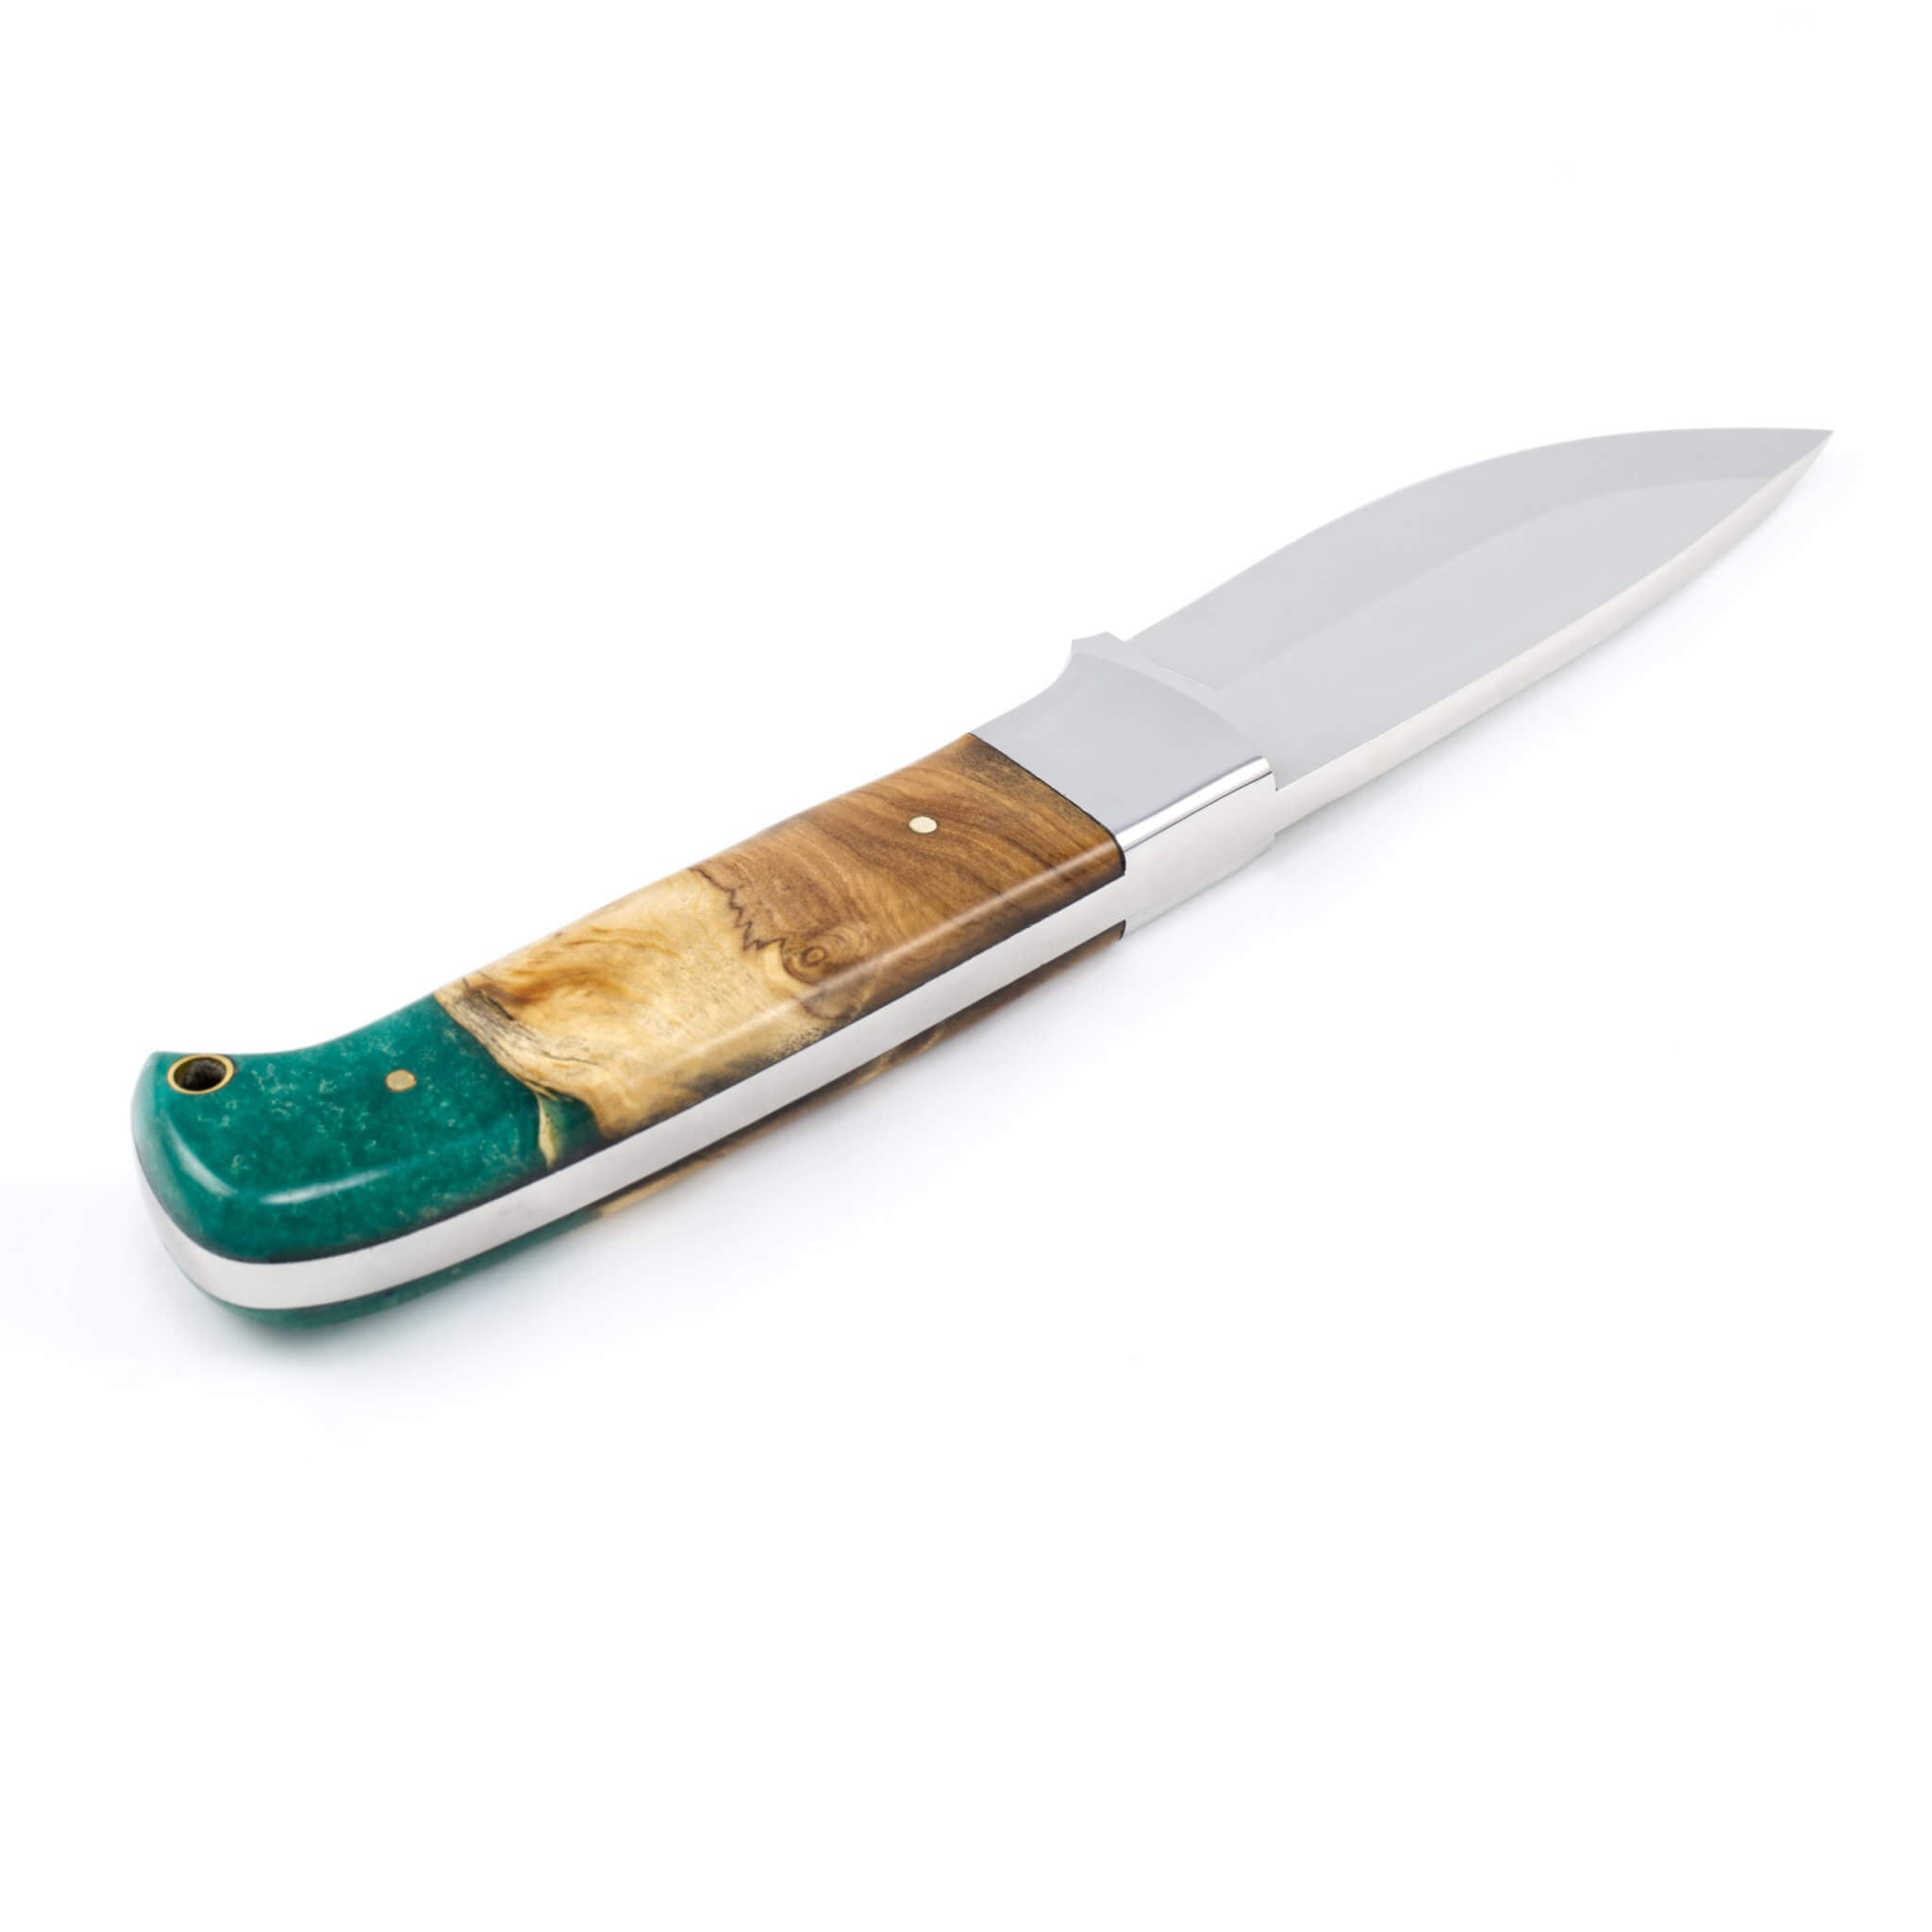 Moxie Momentum Handmade Hunting Knife Vacuum Tempered D2 Stainless Steel Full Tang Blade Olivewood and Resin Handle